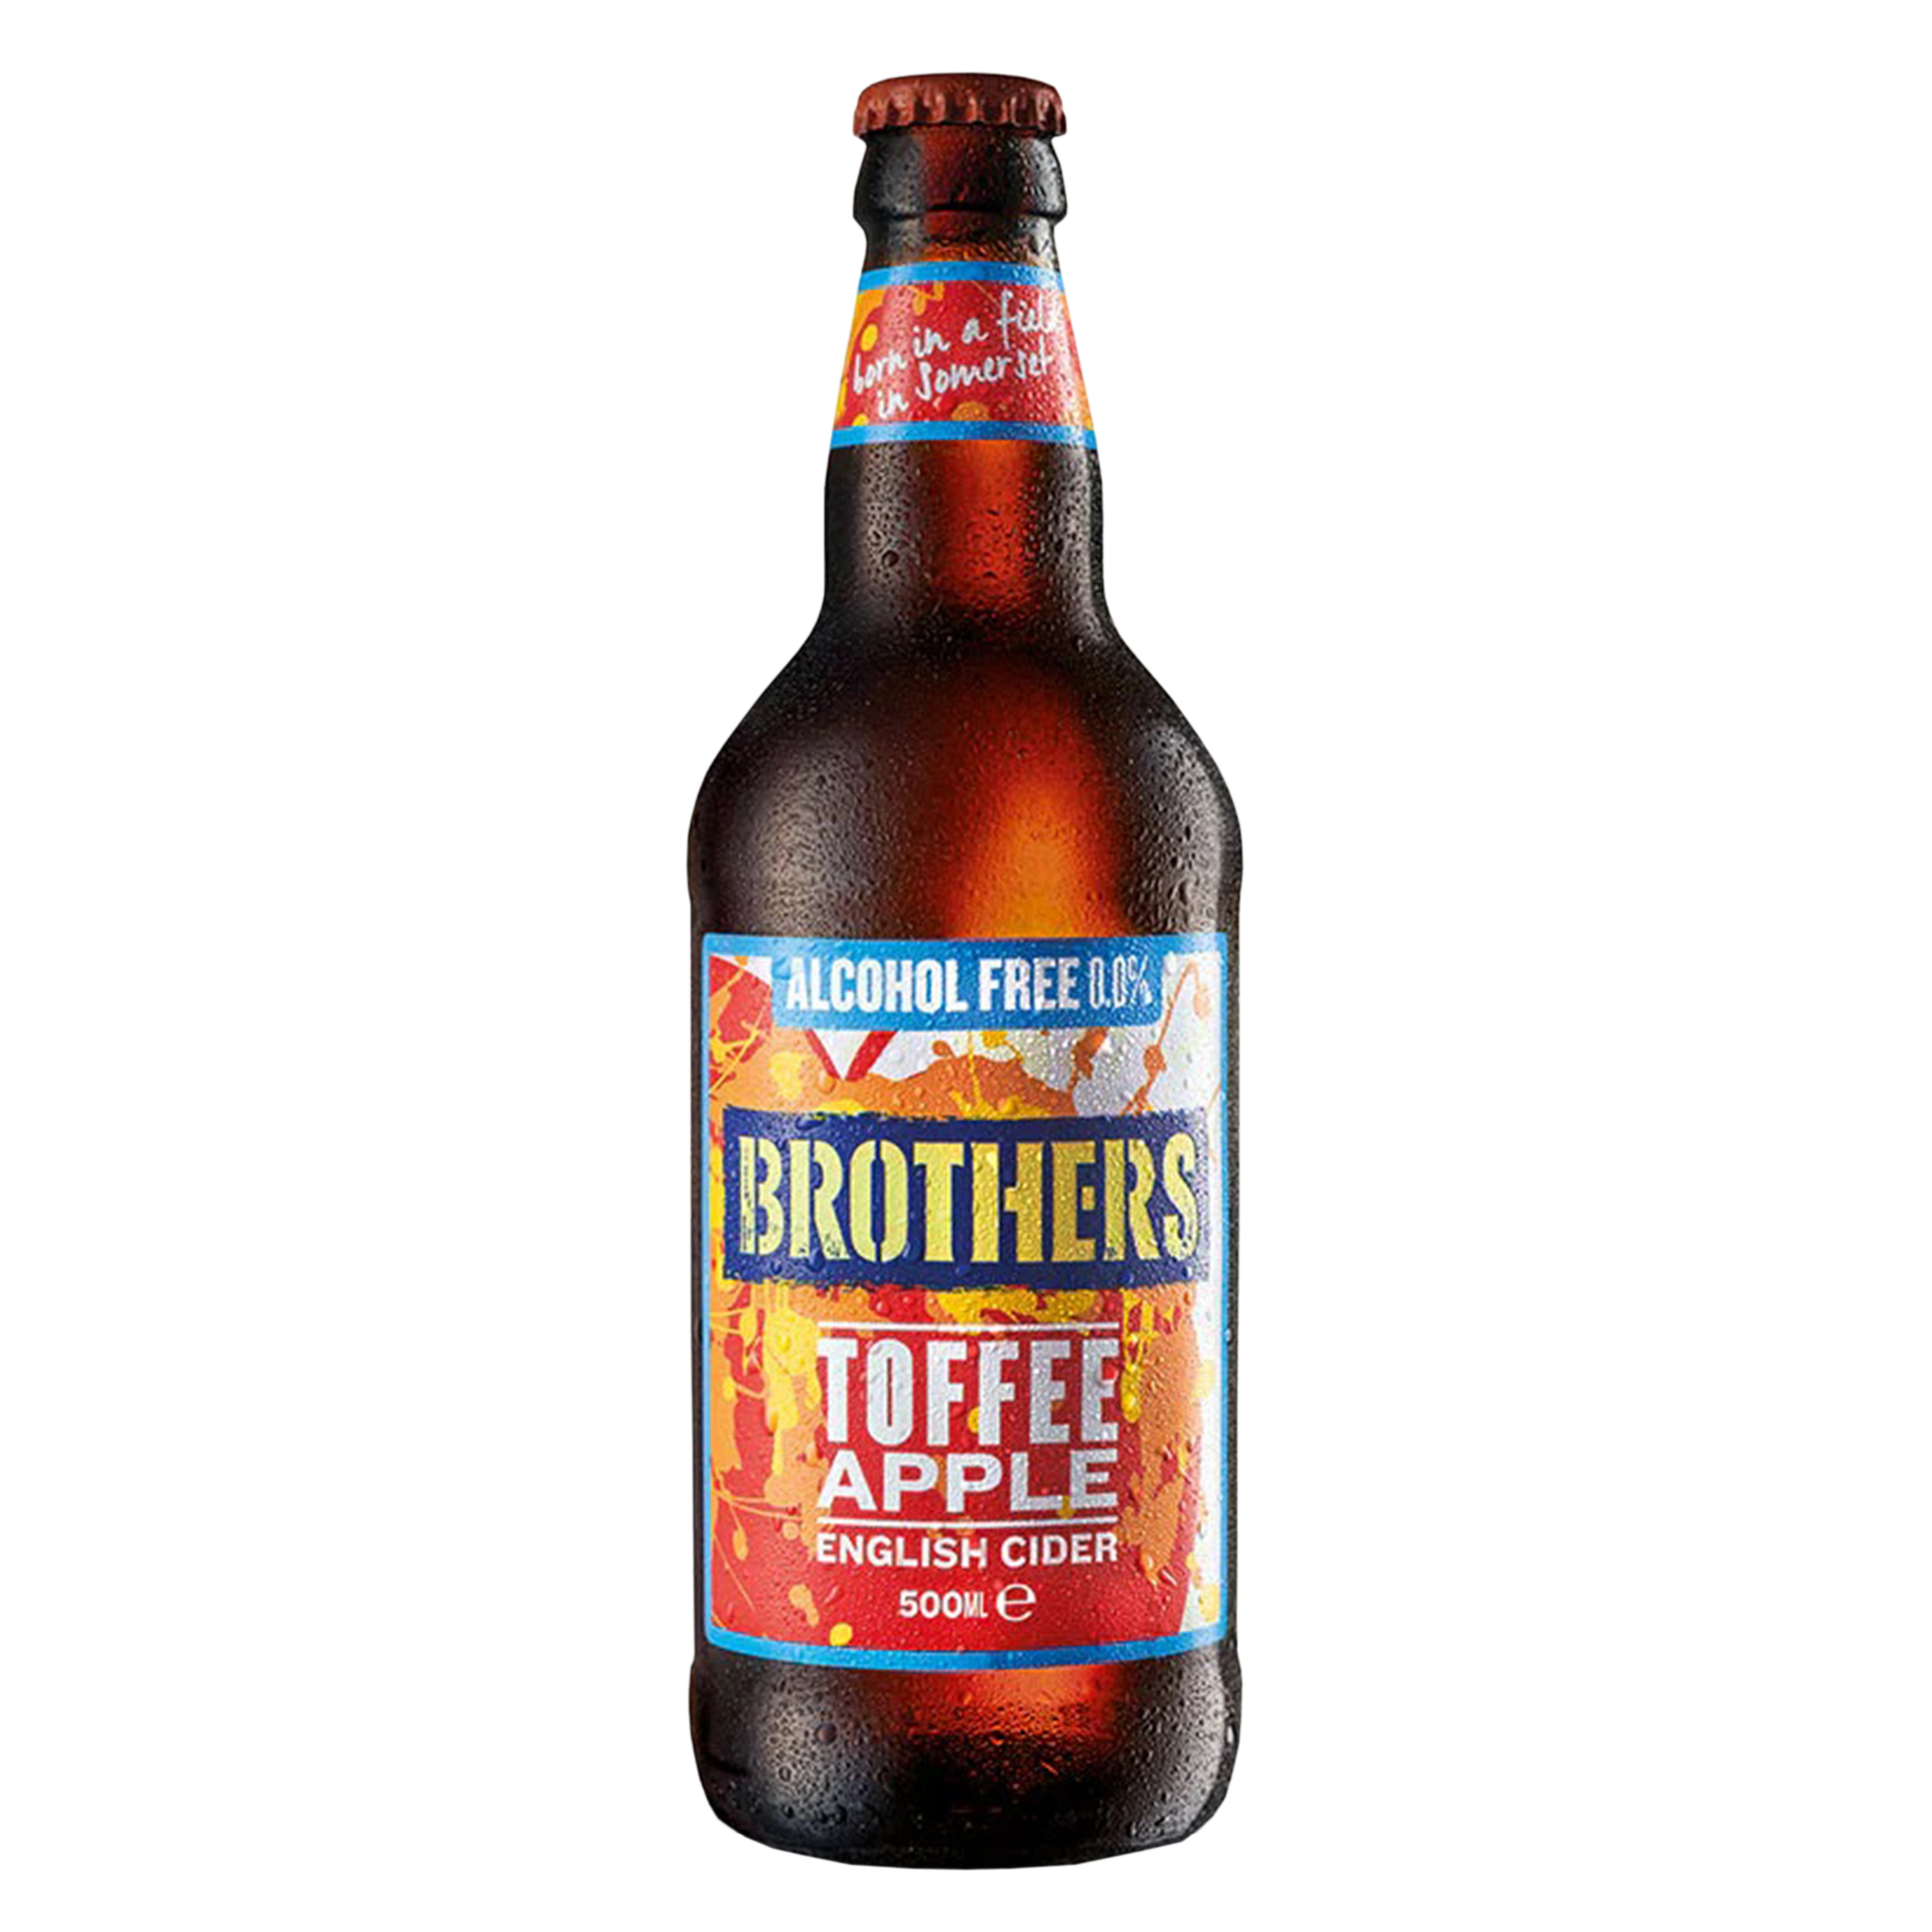 Brothers Toffee Apple Alcohol Free Cider 500ml